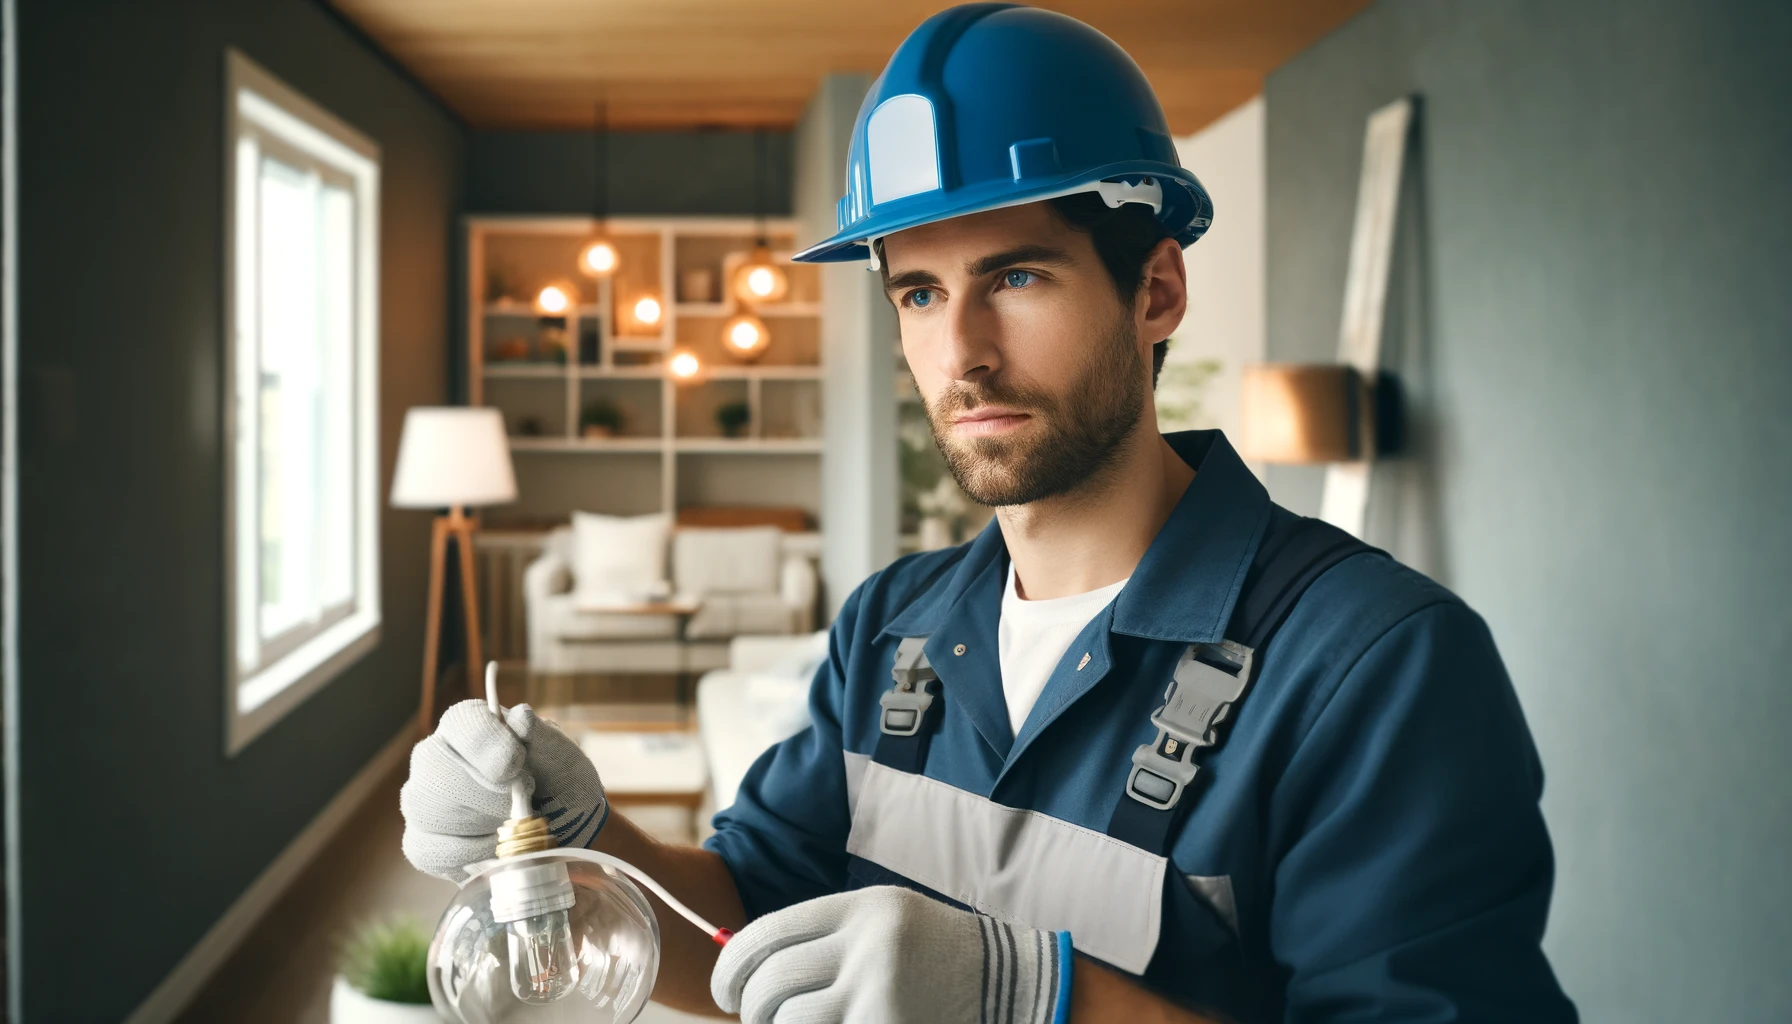 A professional electrician in Kanata installs a modern light fixture in a stylishly decorated home. The electrician, a Caucasian male, is dressed in a blue uniform and safety helmet, focusing intently on connecting wires.